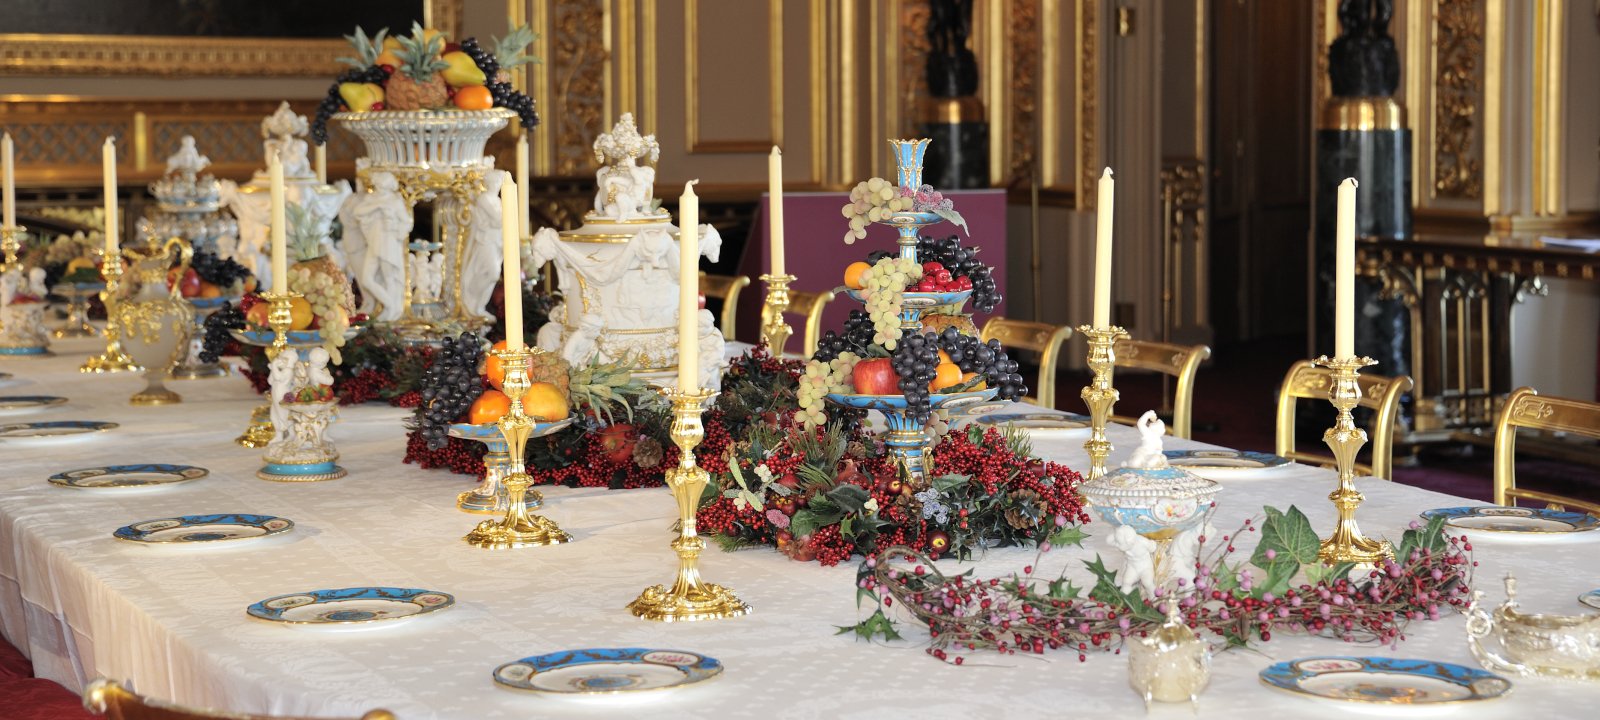 Christmas display, State Dining Room at Windsor Castle